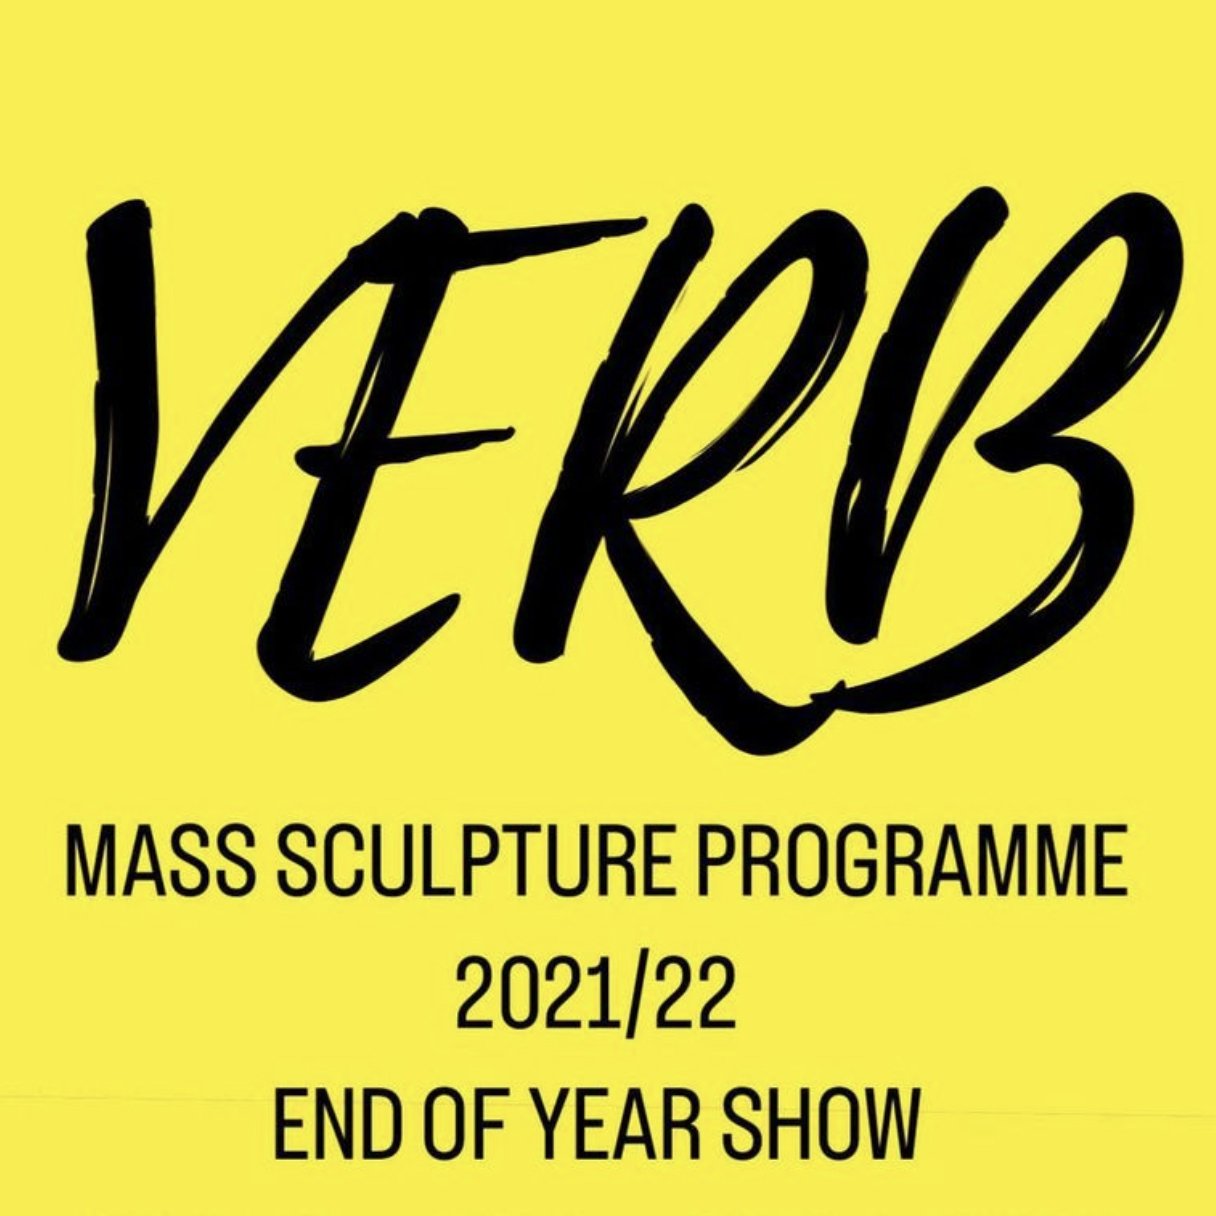 END OF YEAR SHOW 2021/22